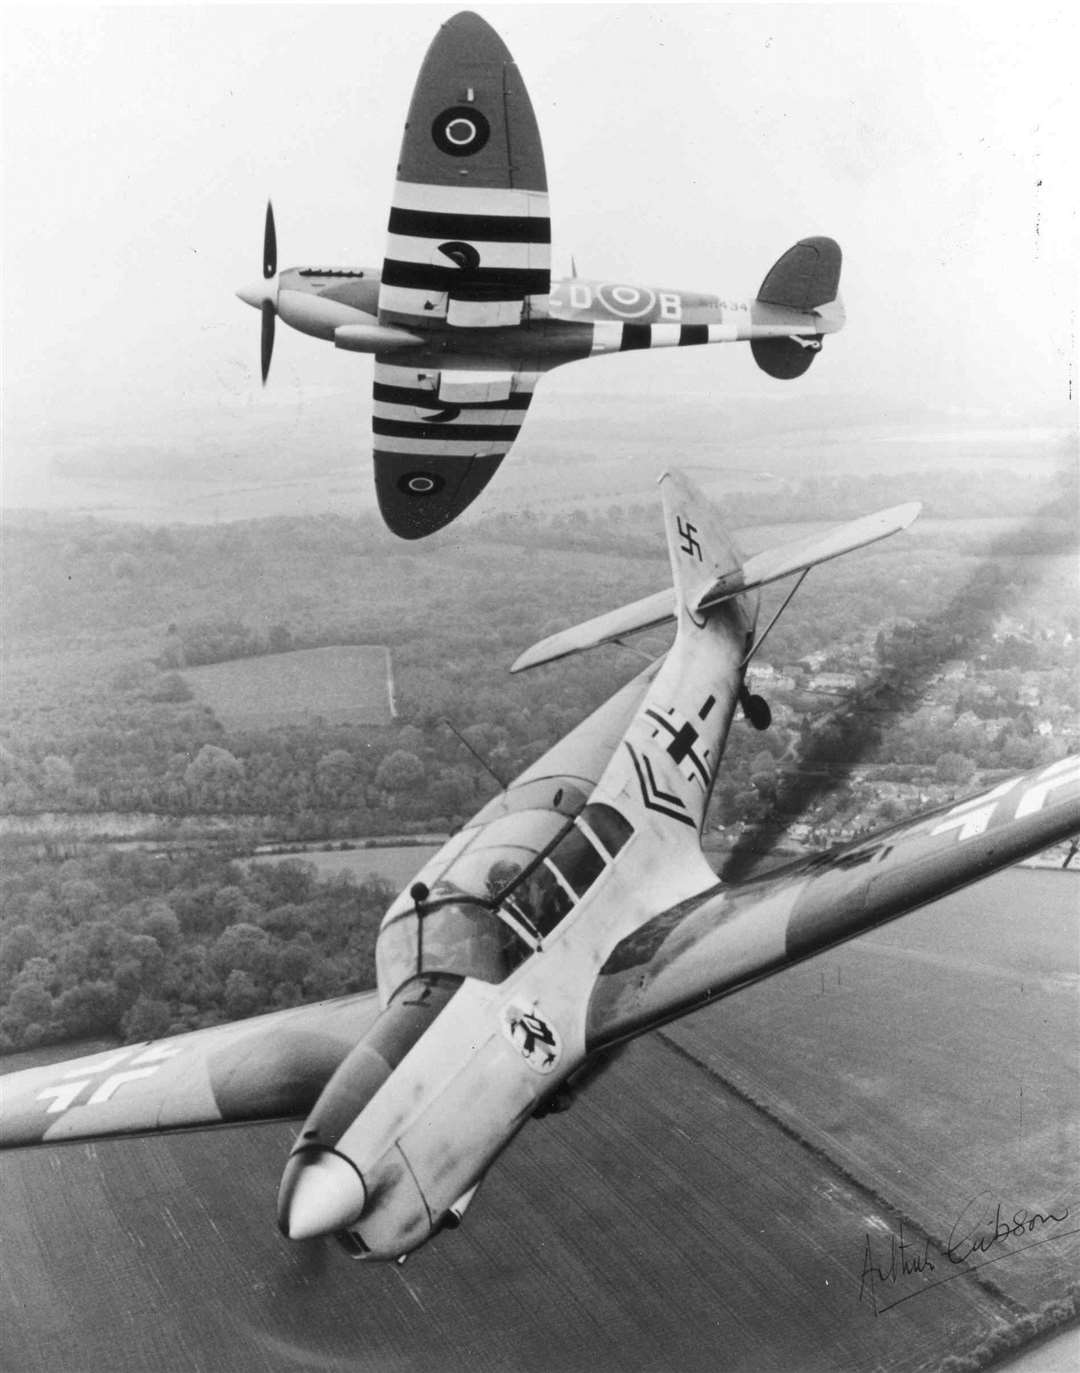 A spitfire 'shoots down' a Messerschmidt 108 over the airfield boundary, a scene reminiscent of many that took place over the Kent Countryside during the war years. August, 1985